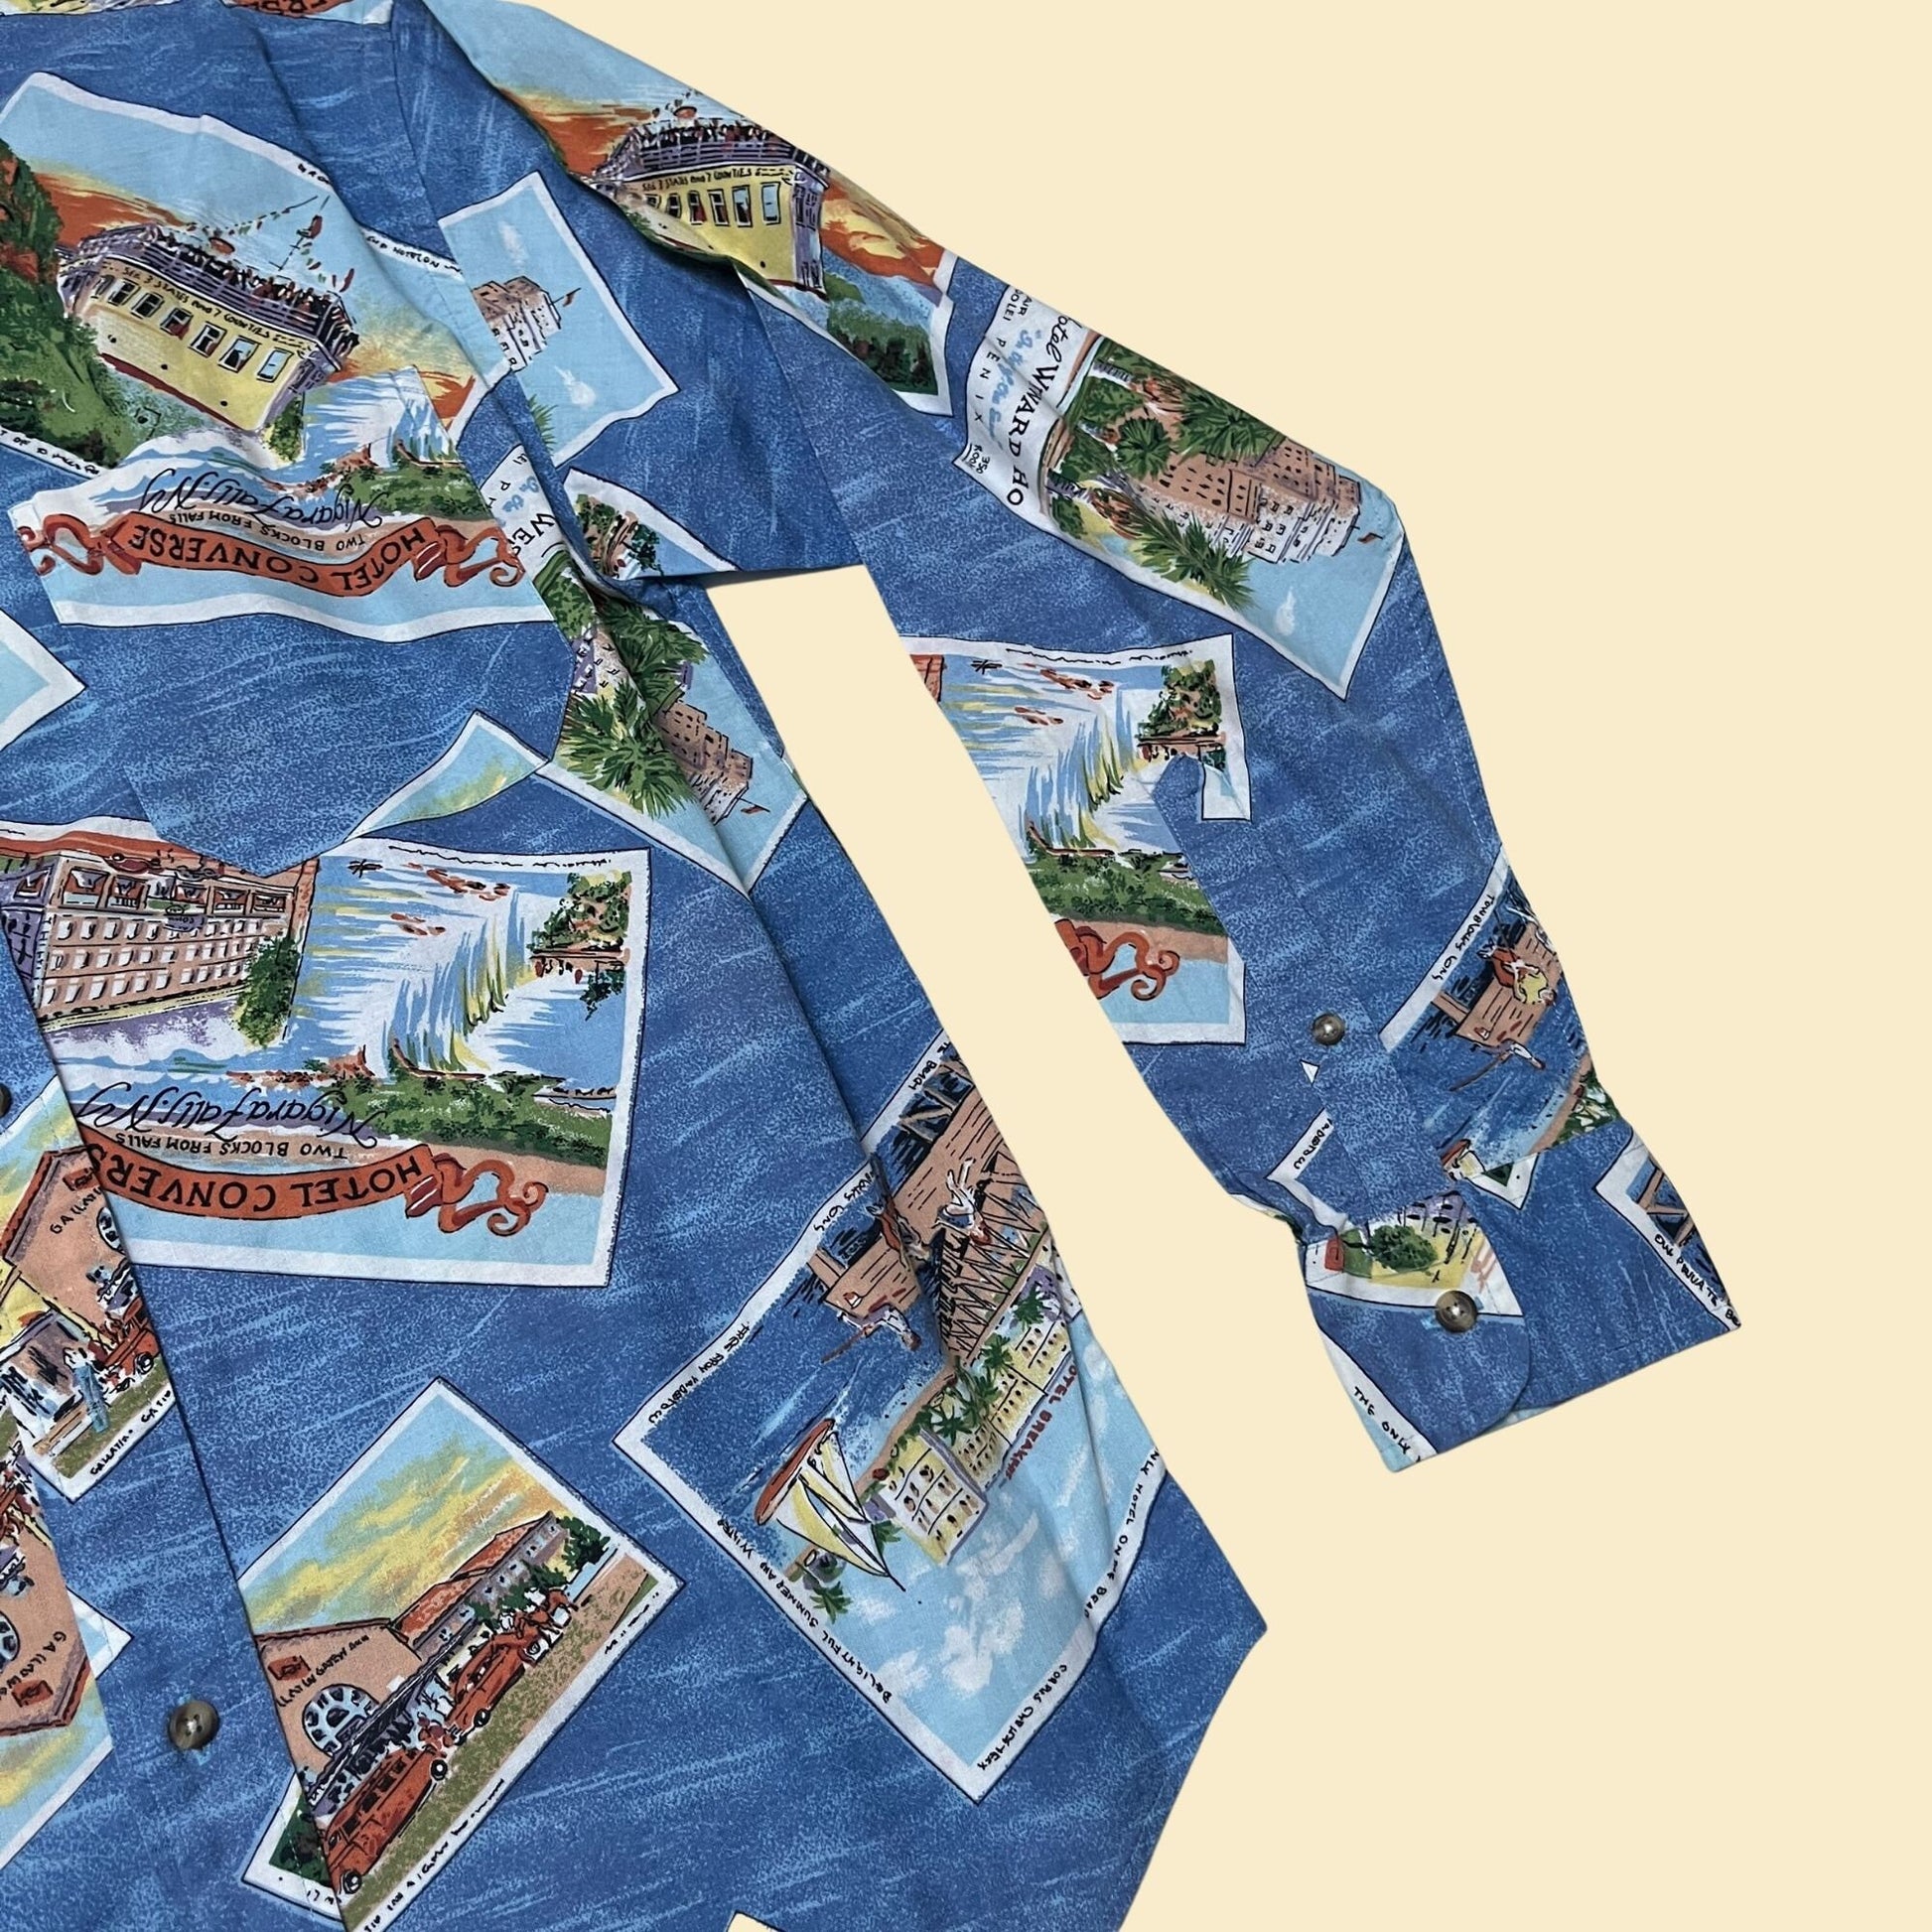 Crazy 70s shirt with post card / hotel theme in size M by Lord & Taylor Kensington Collection, vintage 1970s button down